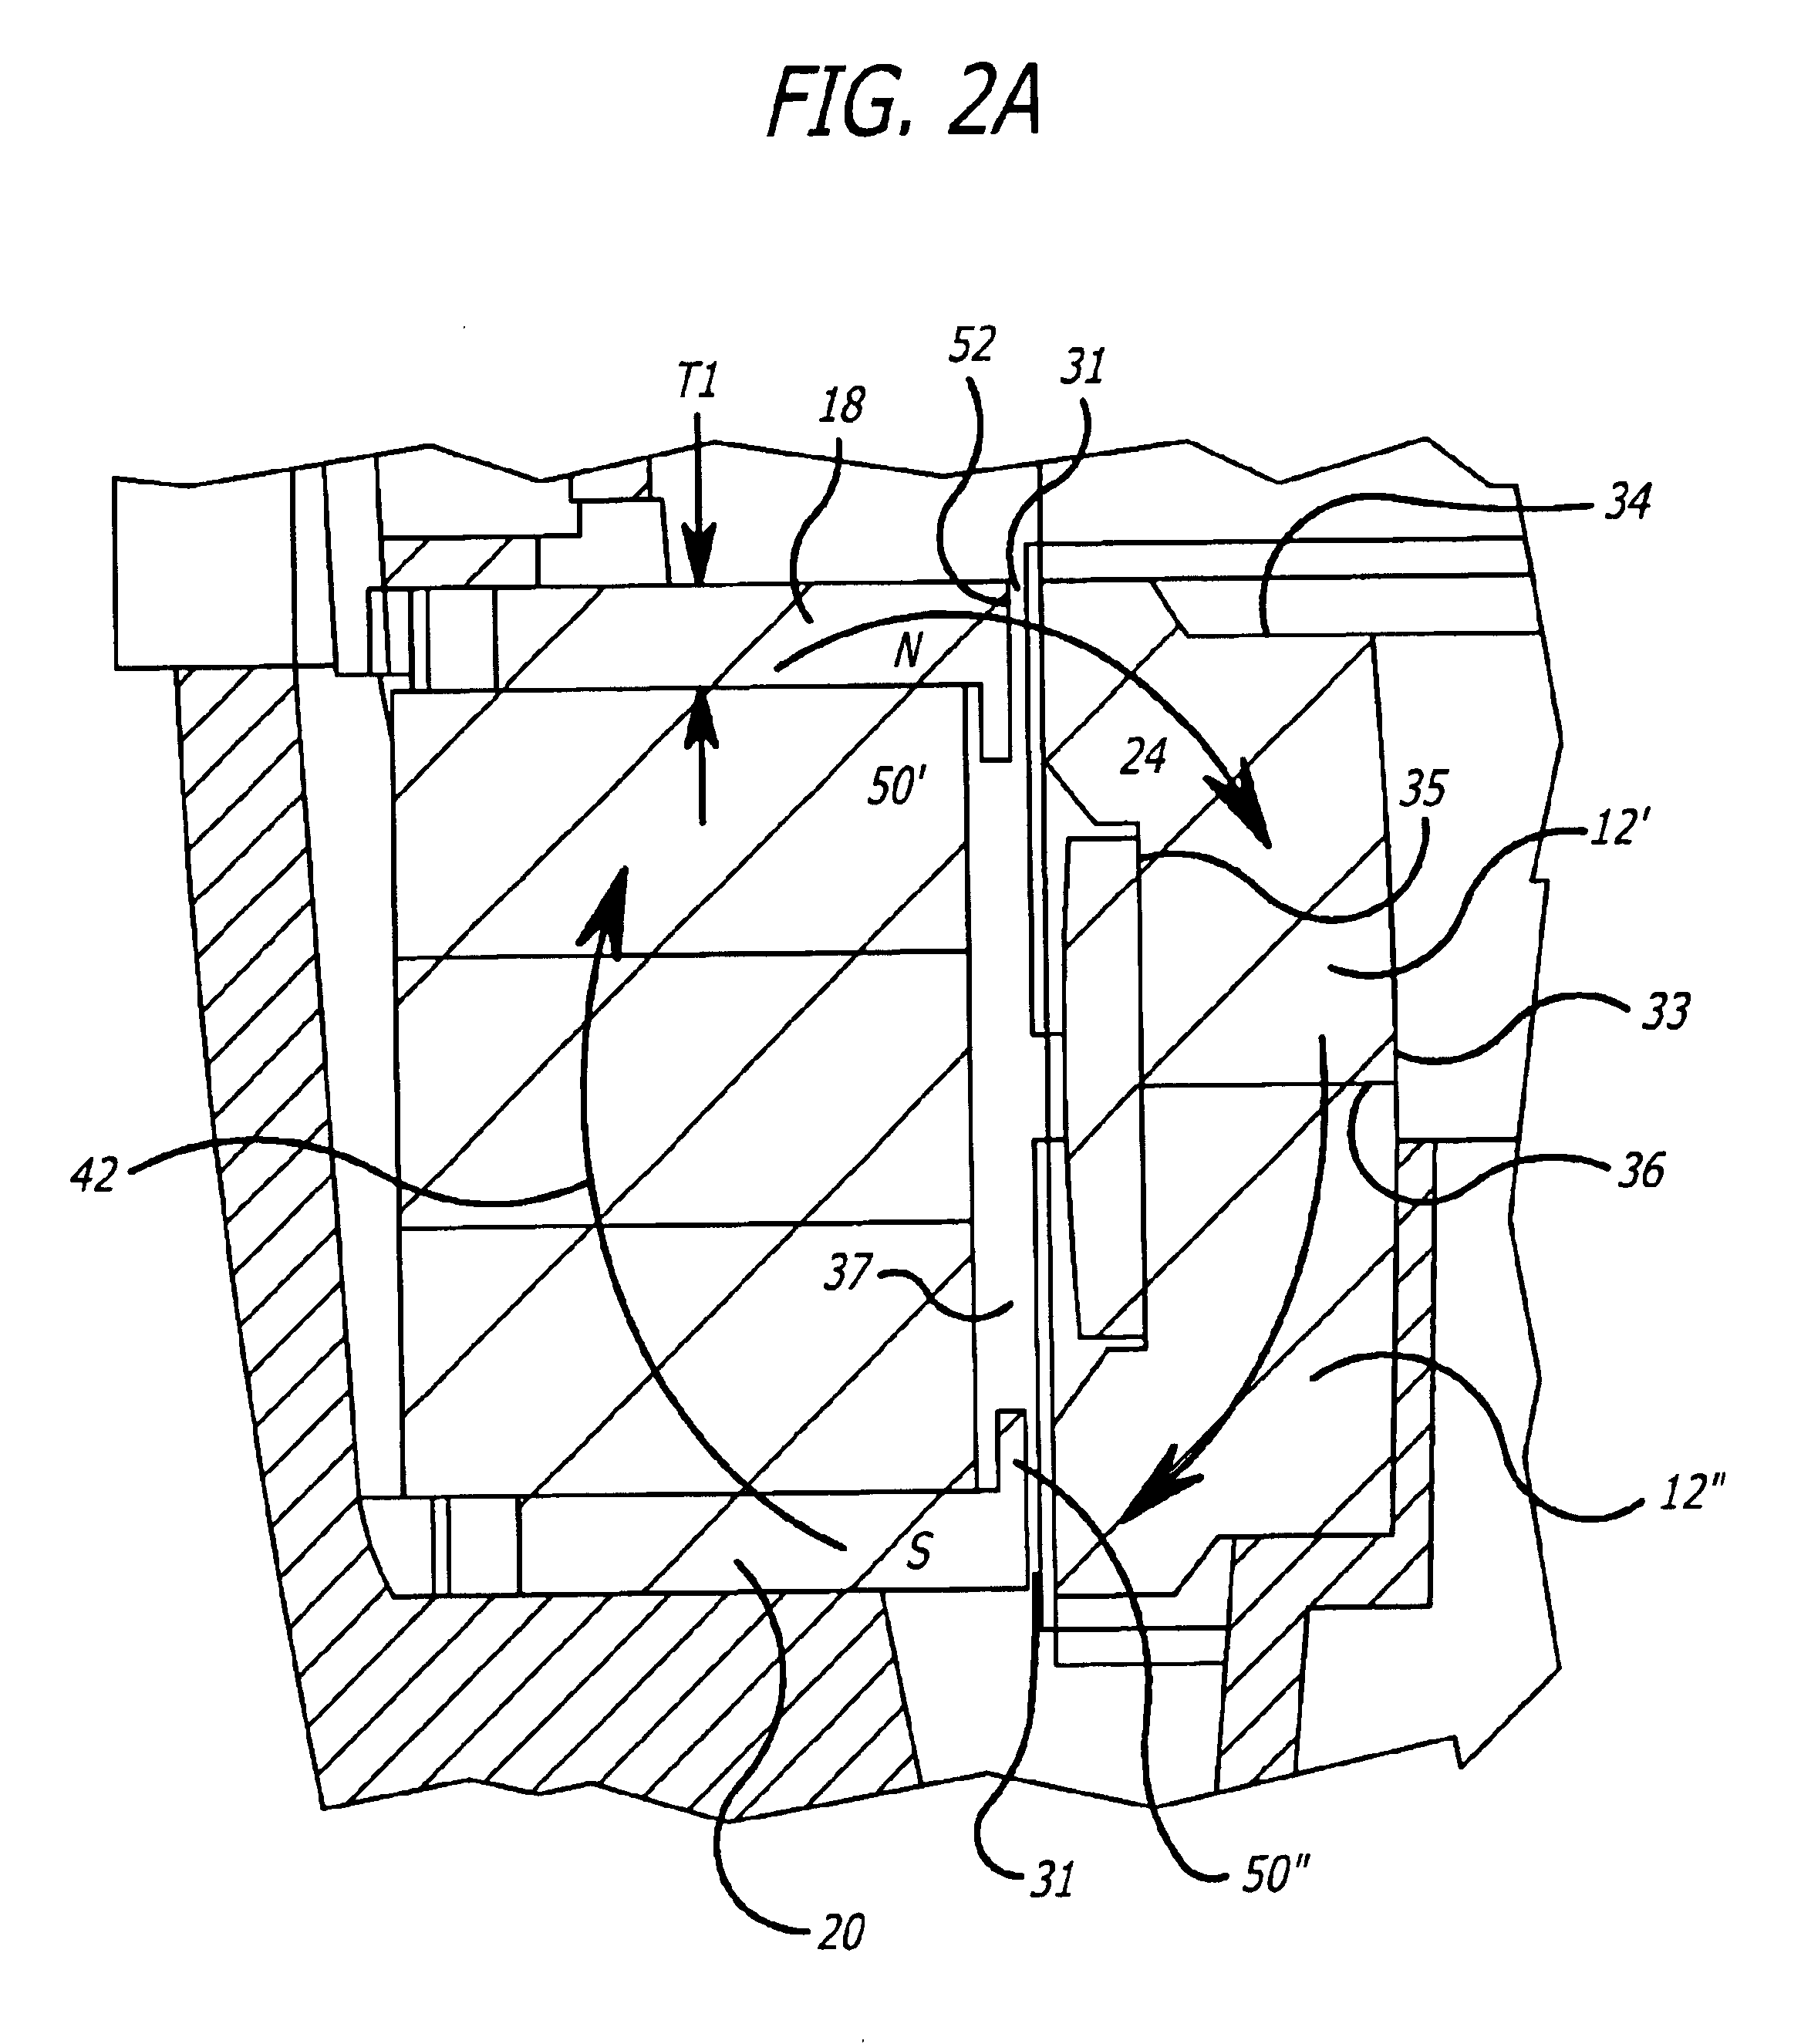 Electromagnetic motor with flux stabilization ring, saturation tips, and radiator